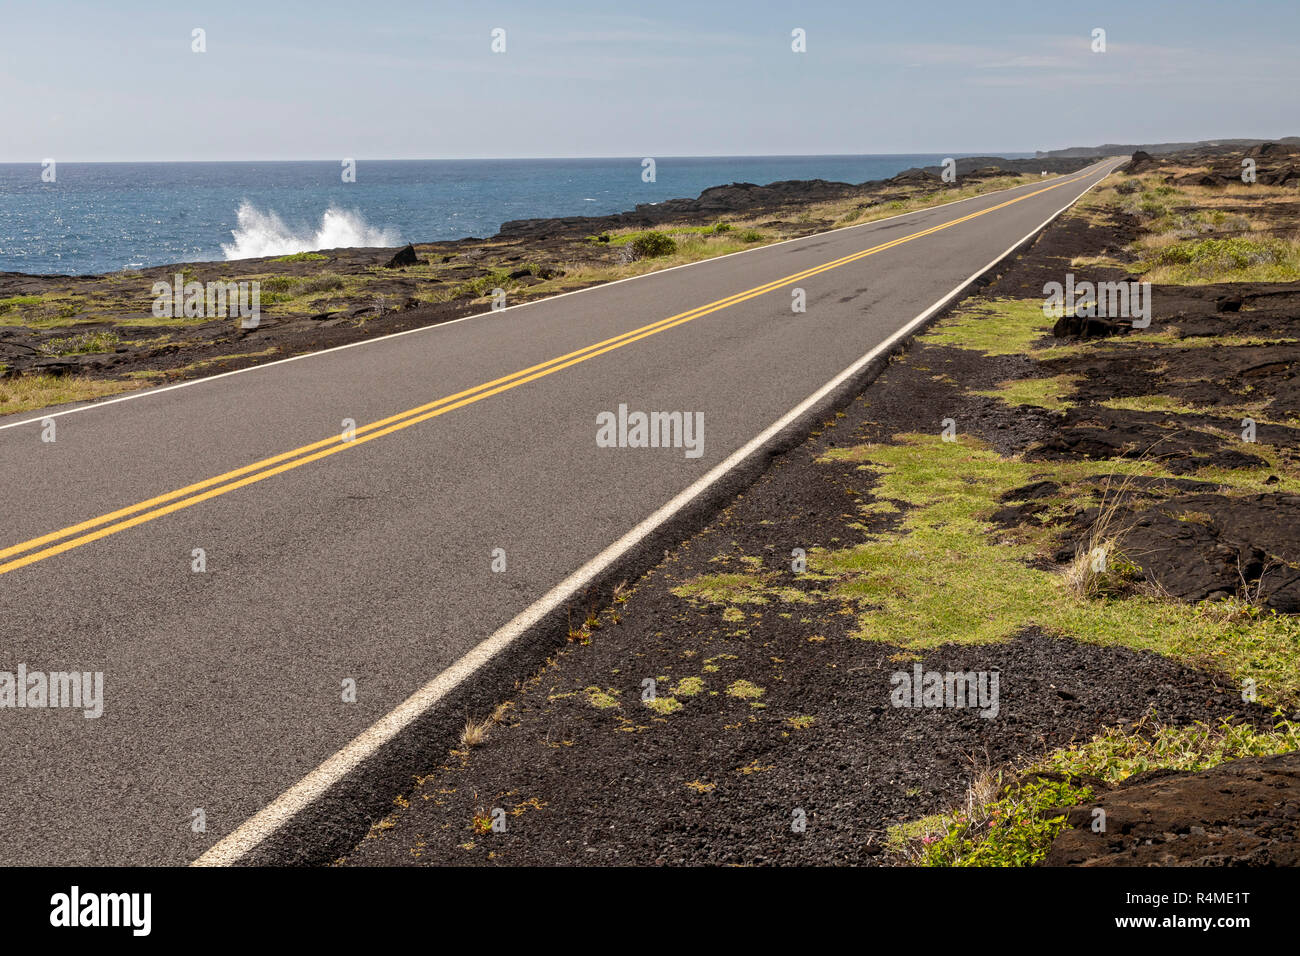 Hawaii Volcanoes National Park, Hawaii - Chain of Craters Road through lava beds along the Pacific coastline. Stock Photo